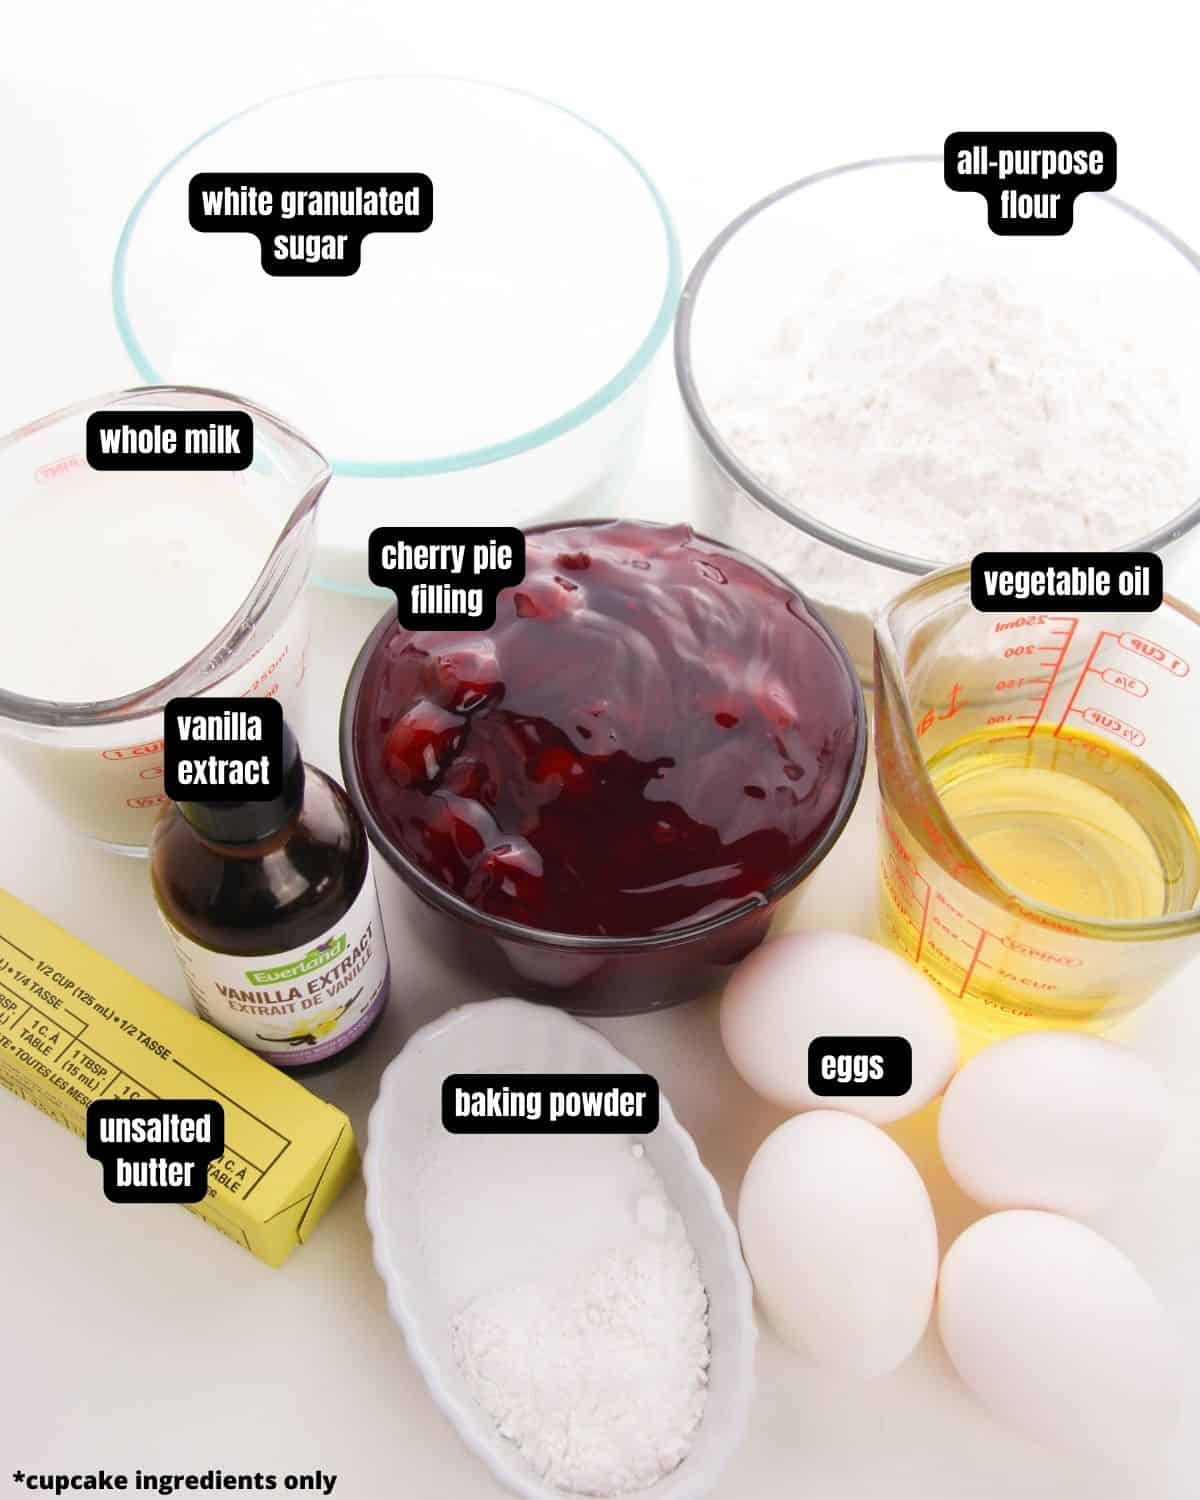 Ingredients to make homemade vanilla cupcakes with cherry pie fillings.